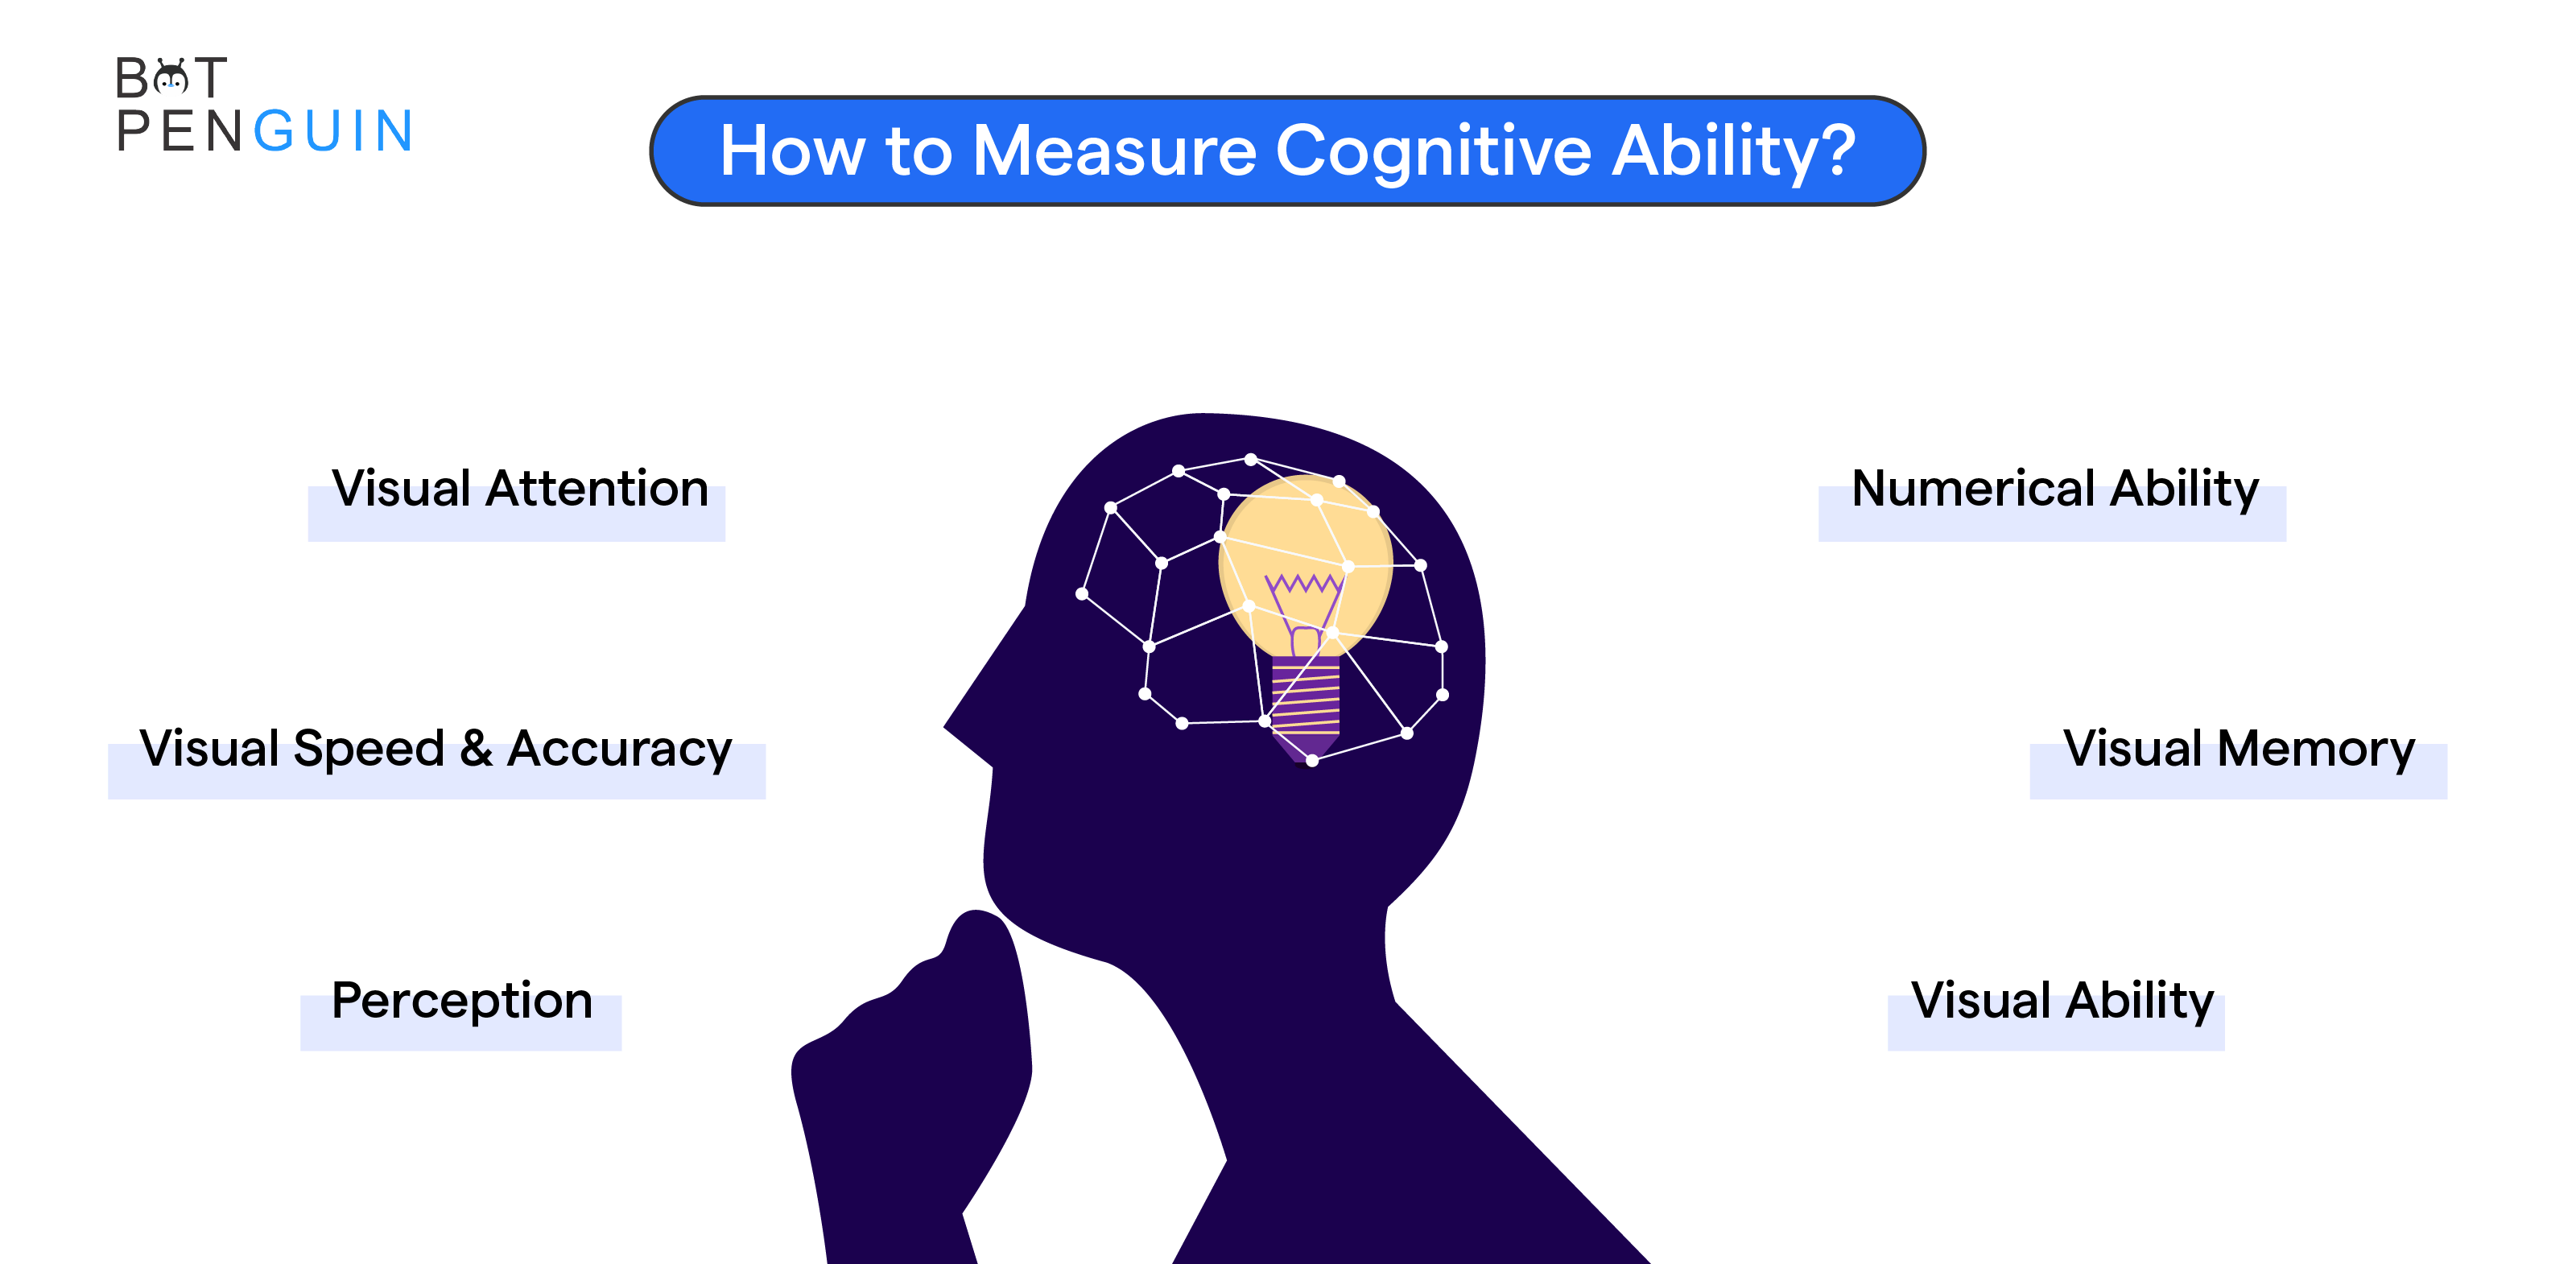 How to Measure Cognitive Ability